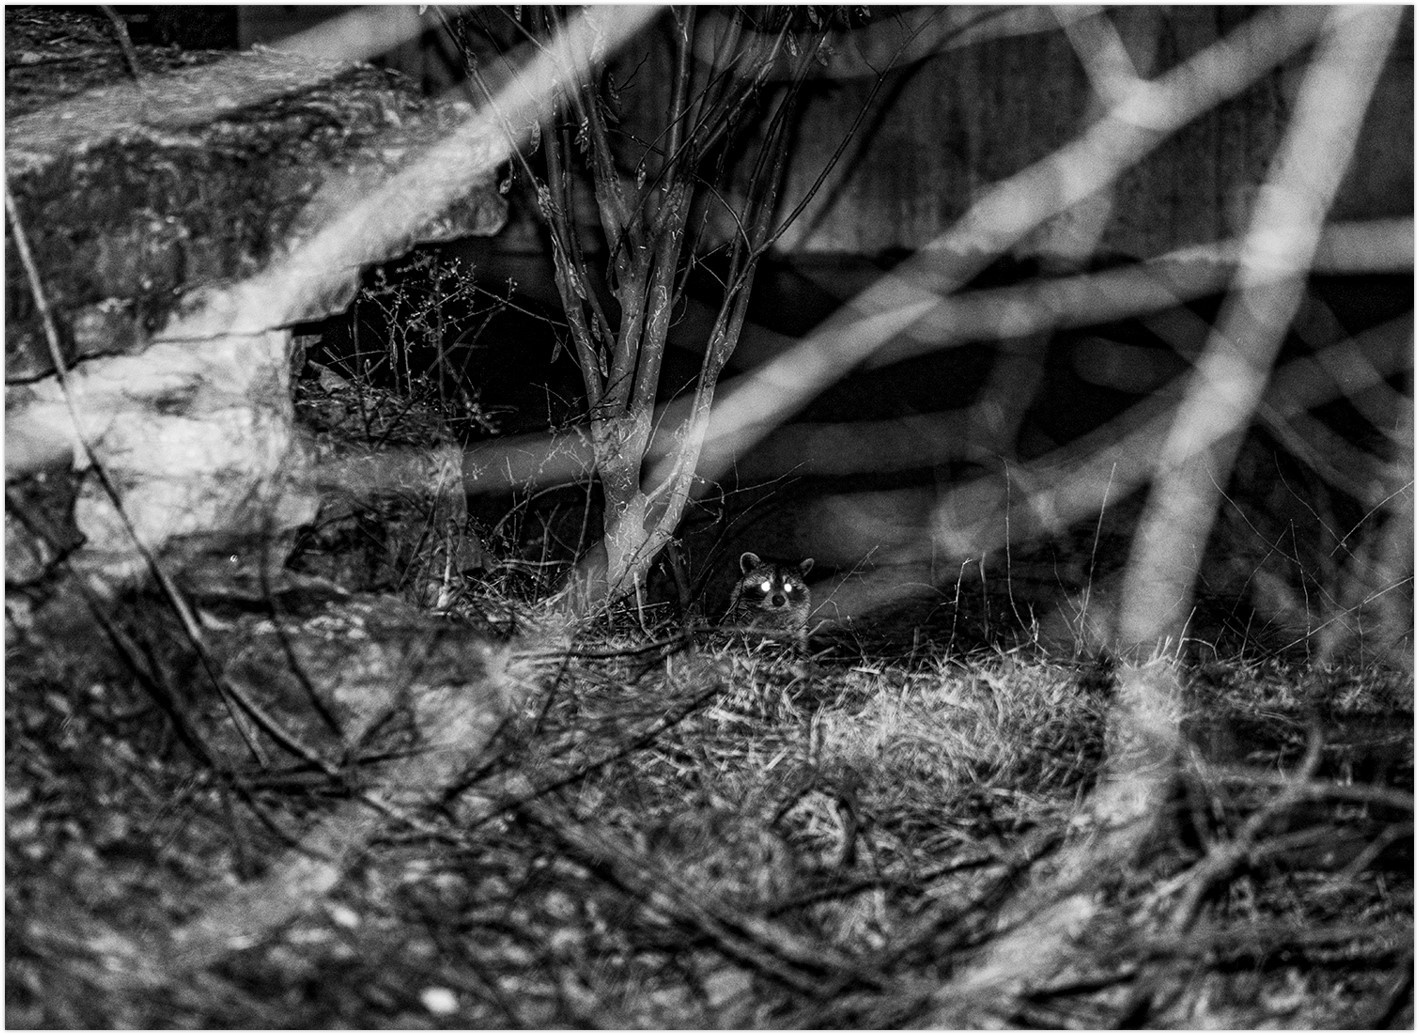 Black and white night photo through branches of a racoon hidden behind foliage